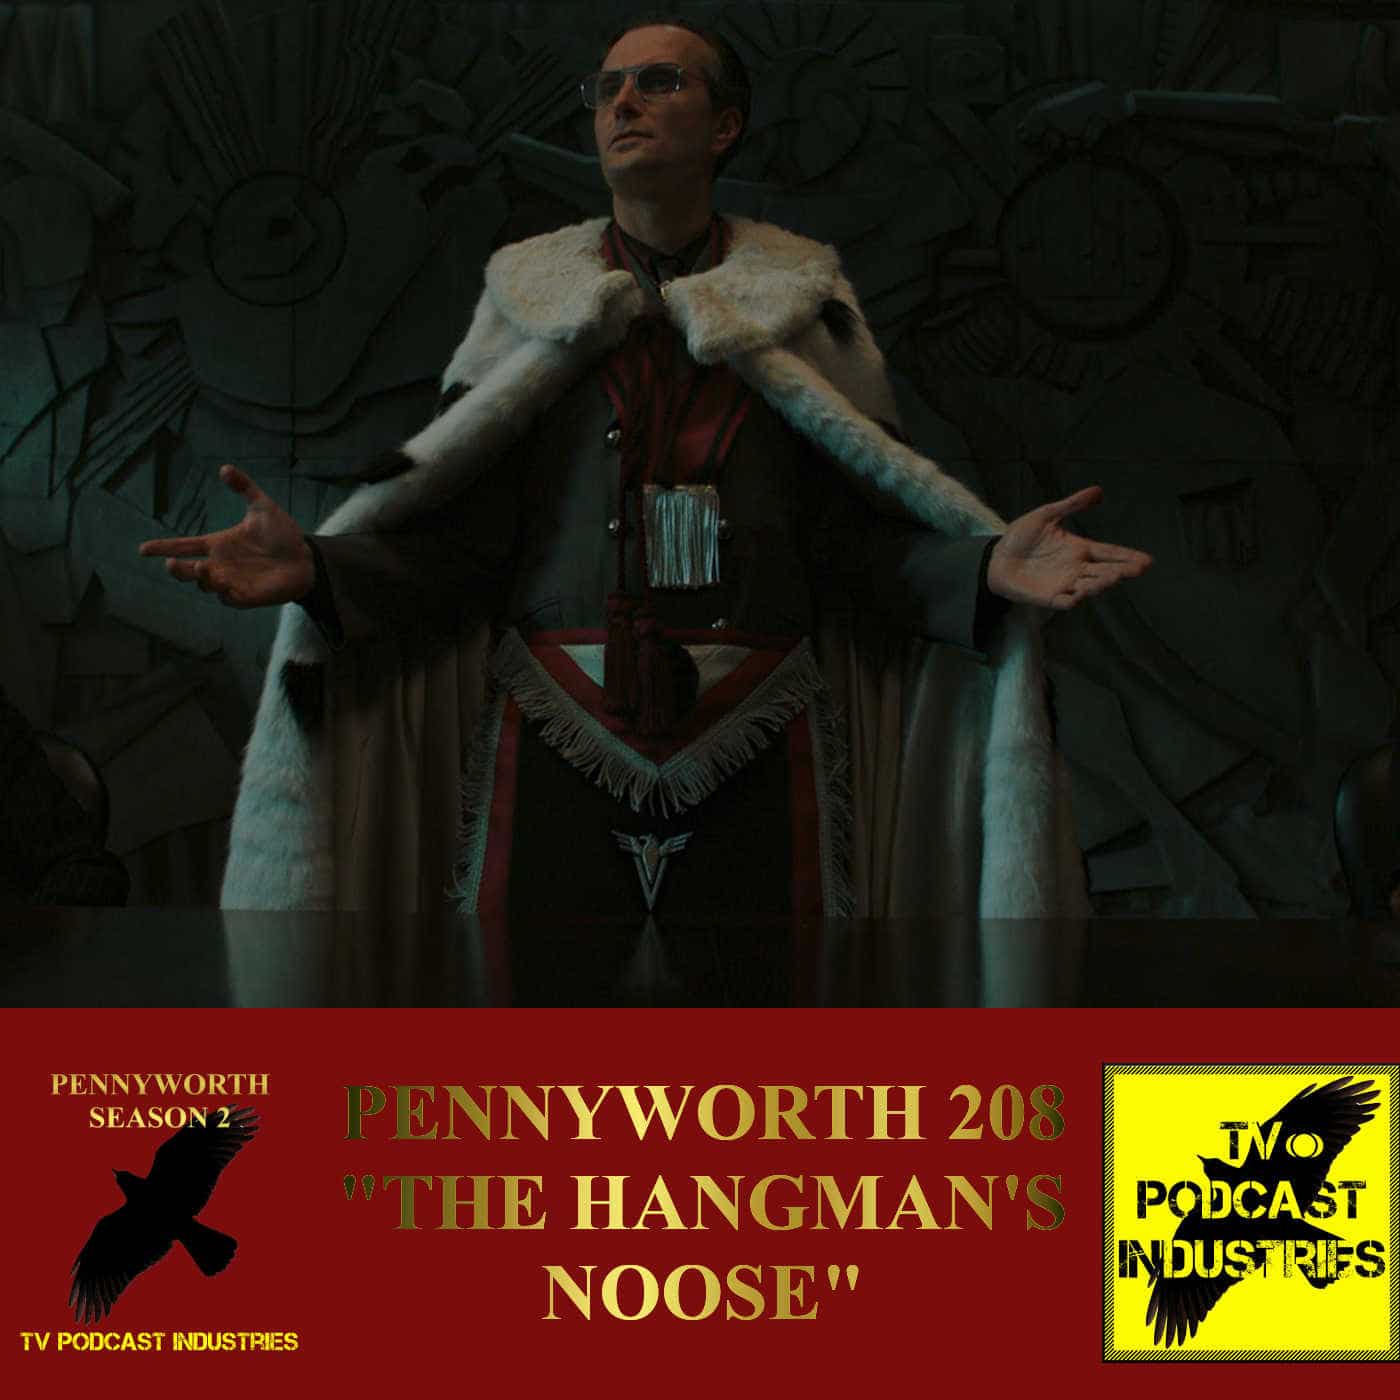 Pennyworth Season 2 Episode 8 "The Hangman's Noose" Podcast by TV Podcast Industries